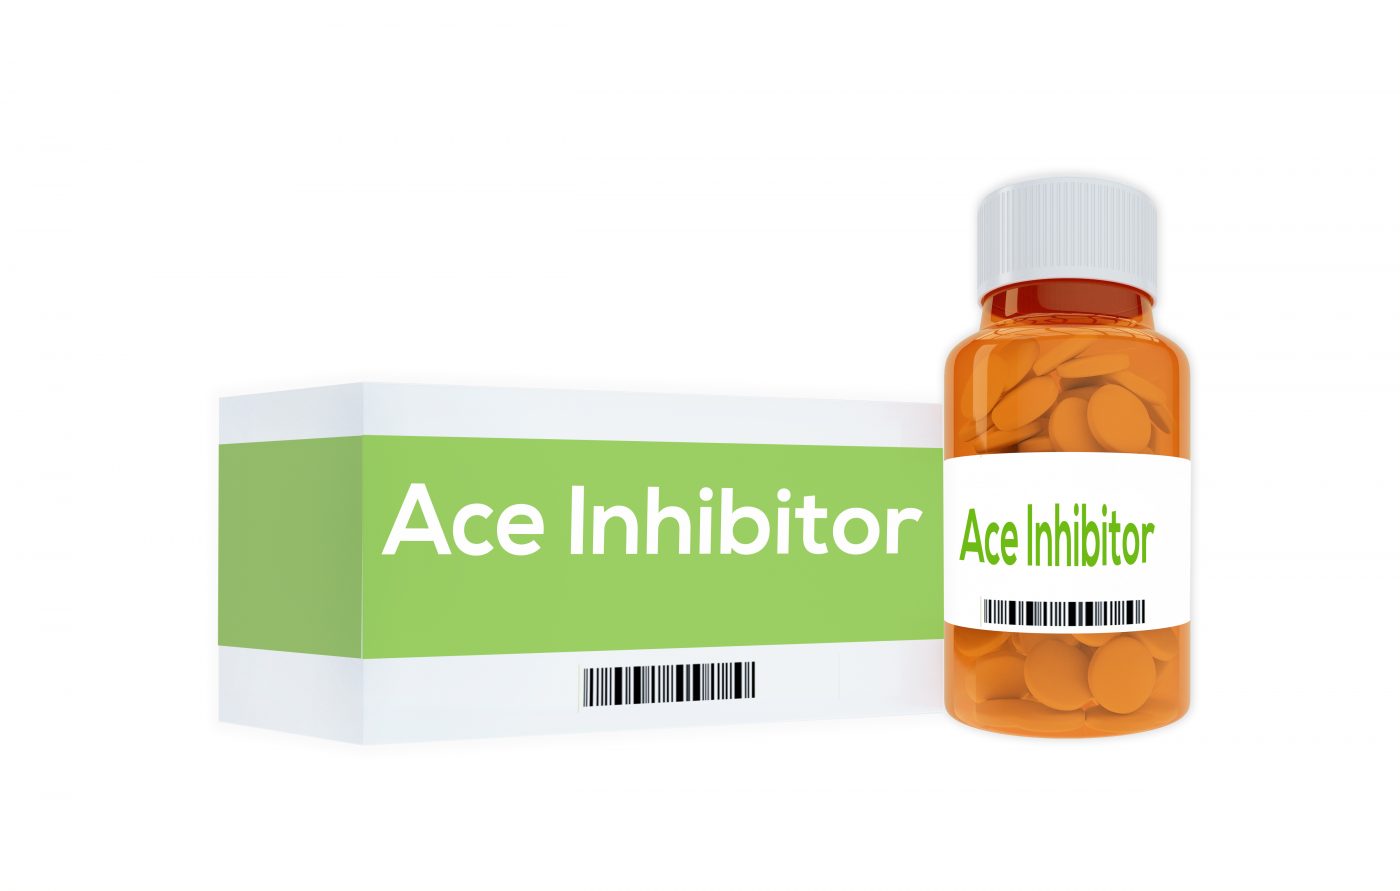 Treating muscular dystrophy patients with ACE inhibitors lowered heart fibrosis development.